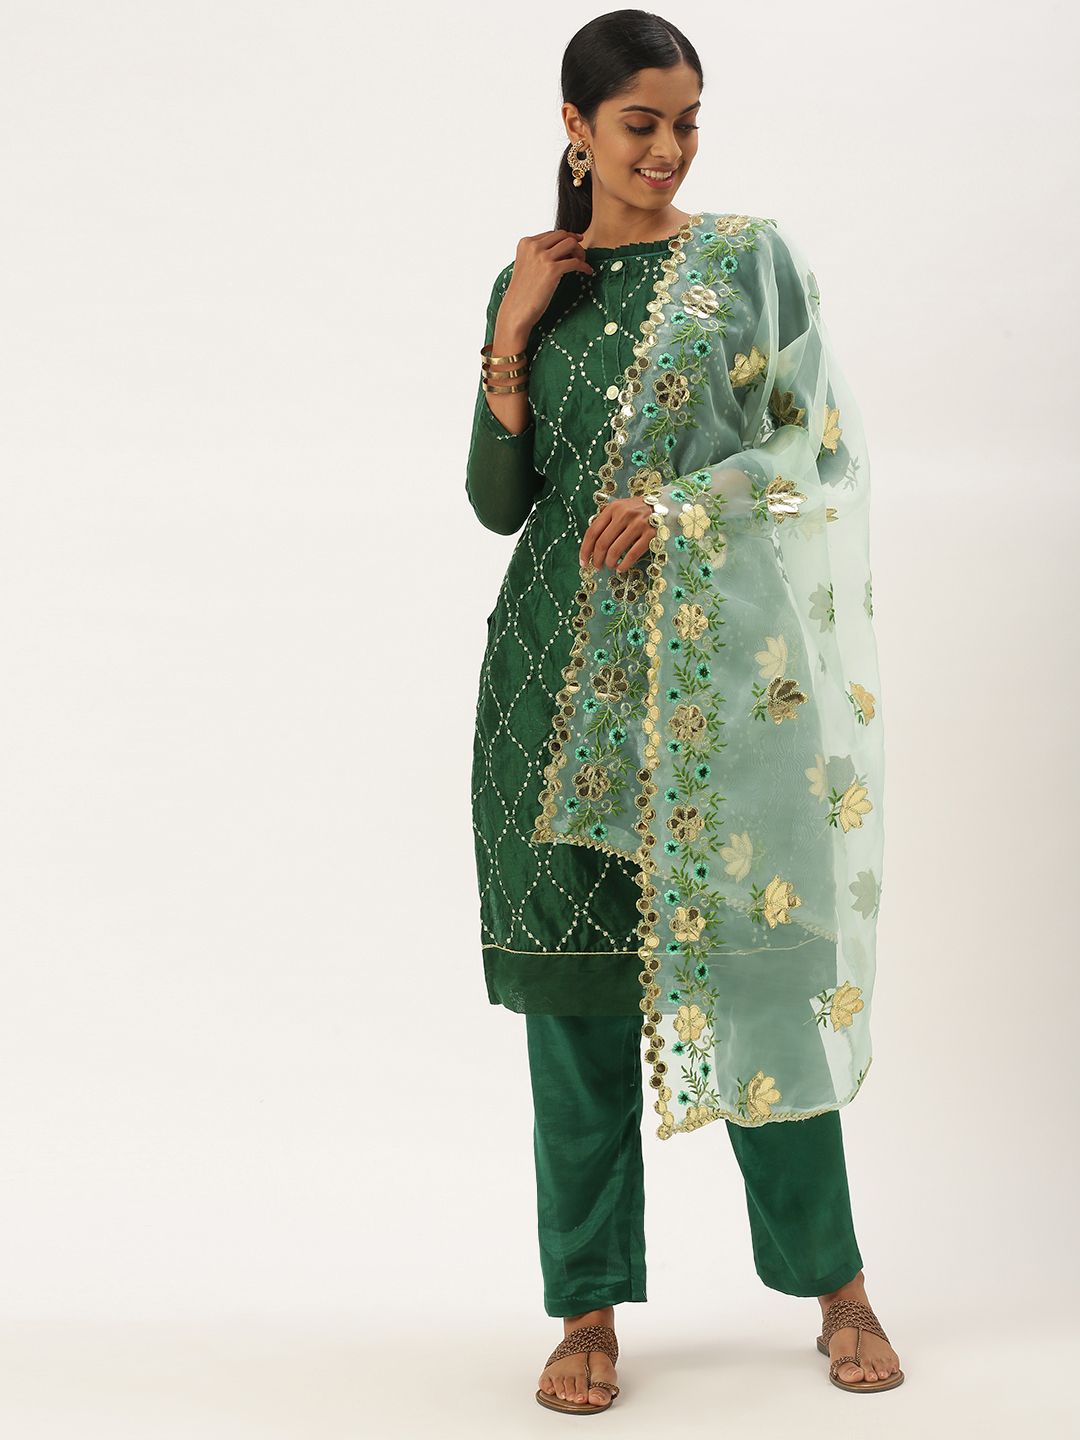 LADUSAA Green Unstitched Dress Material Price in India